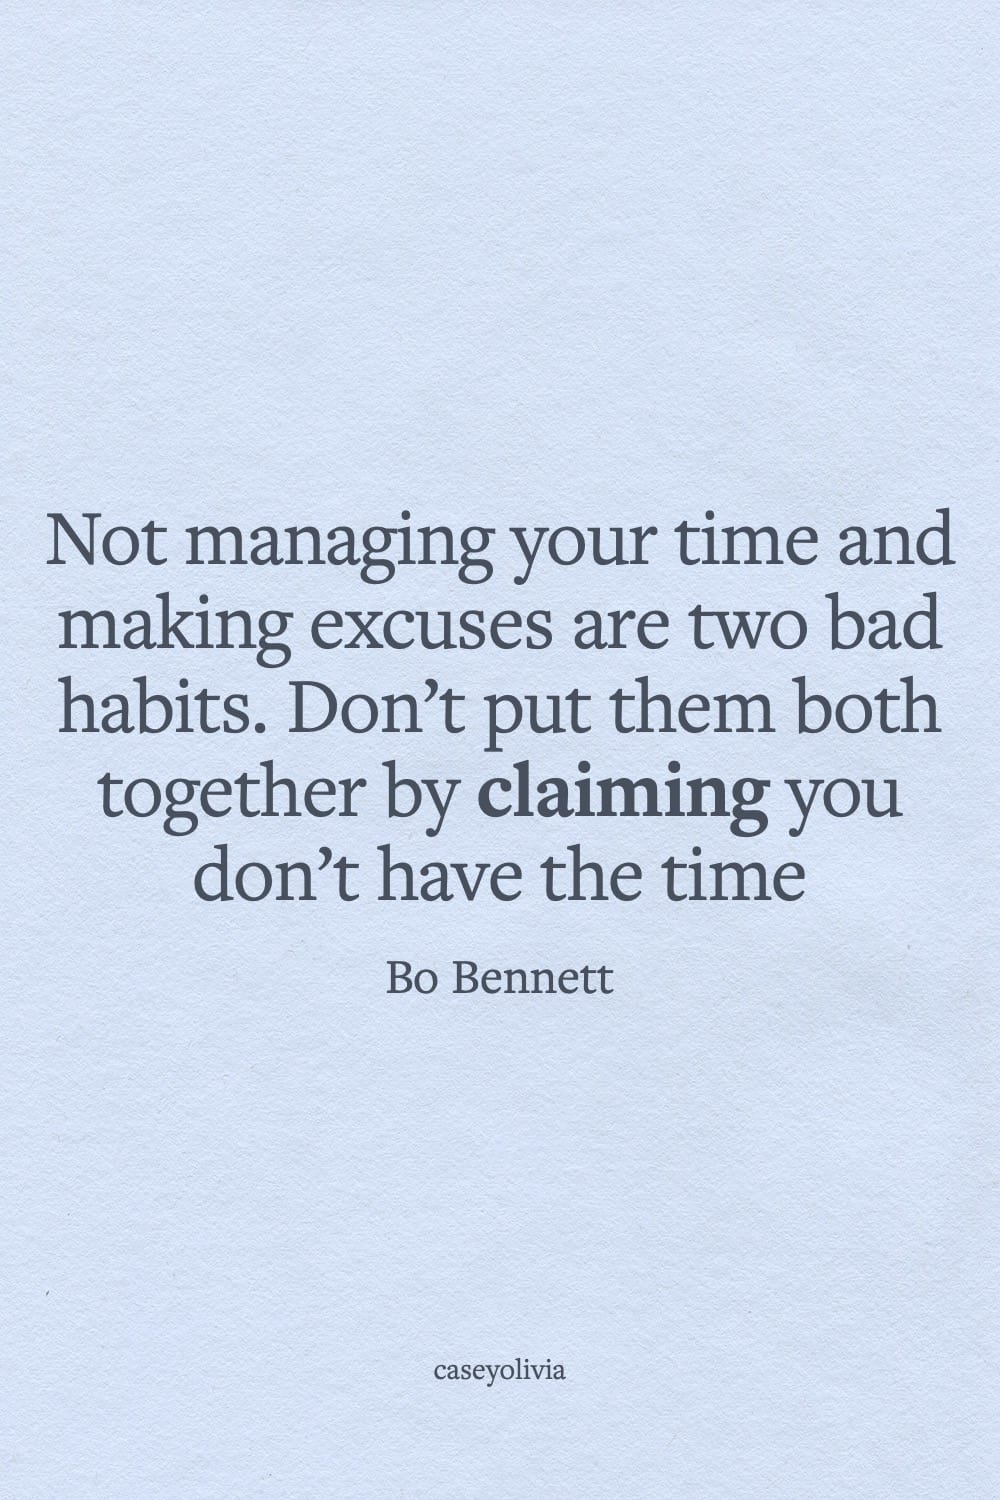 bo bennett not managing your time small habit quote